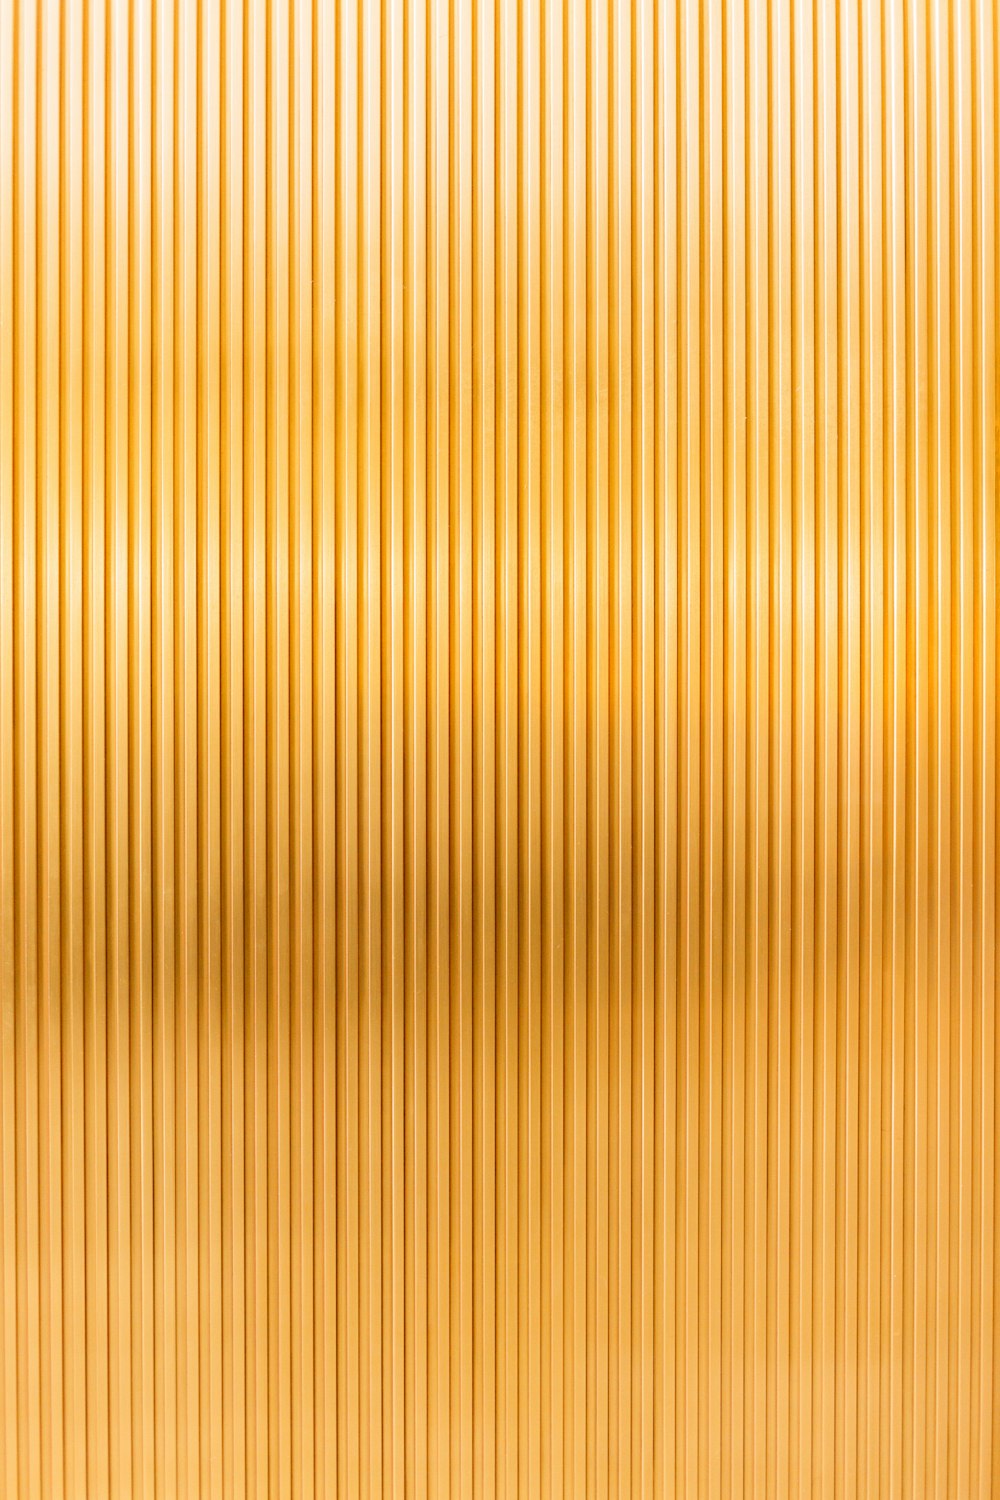 a gold metallic background with vertical lines